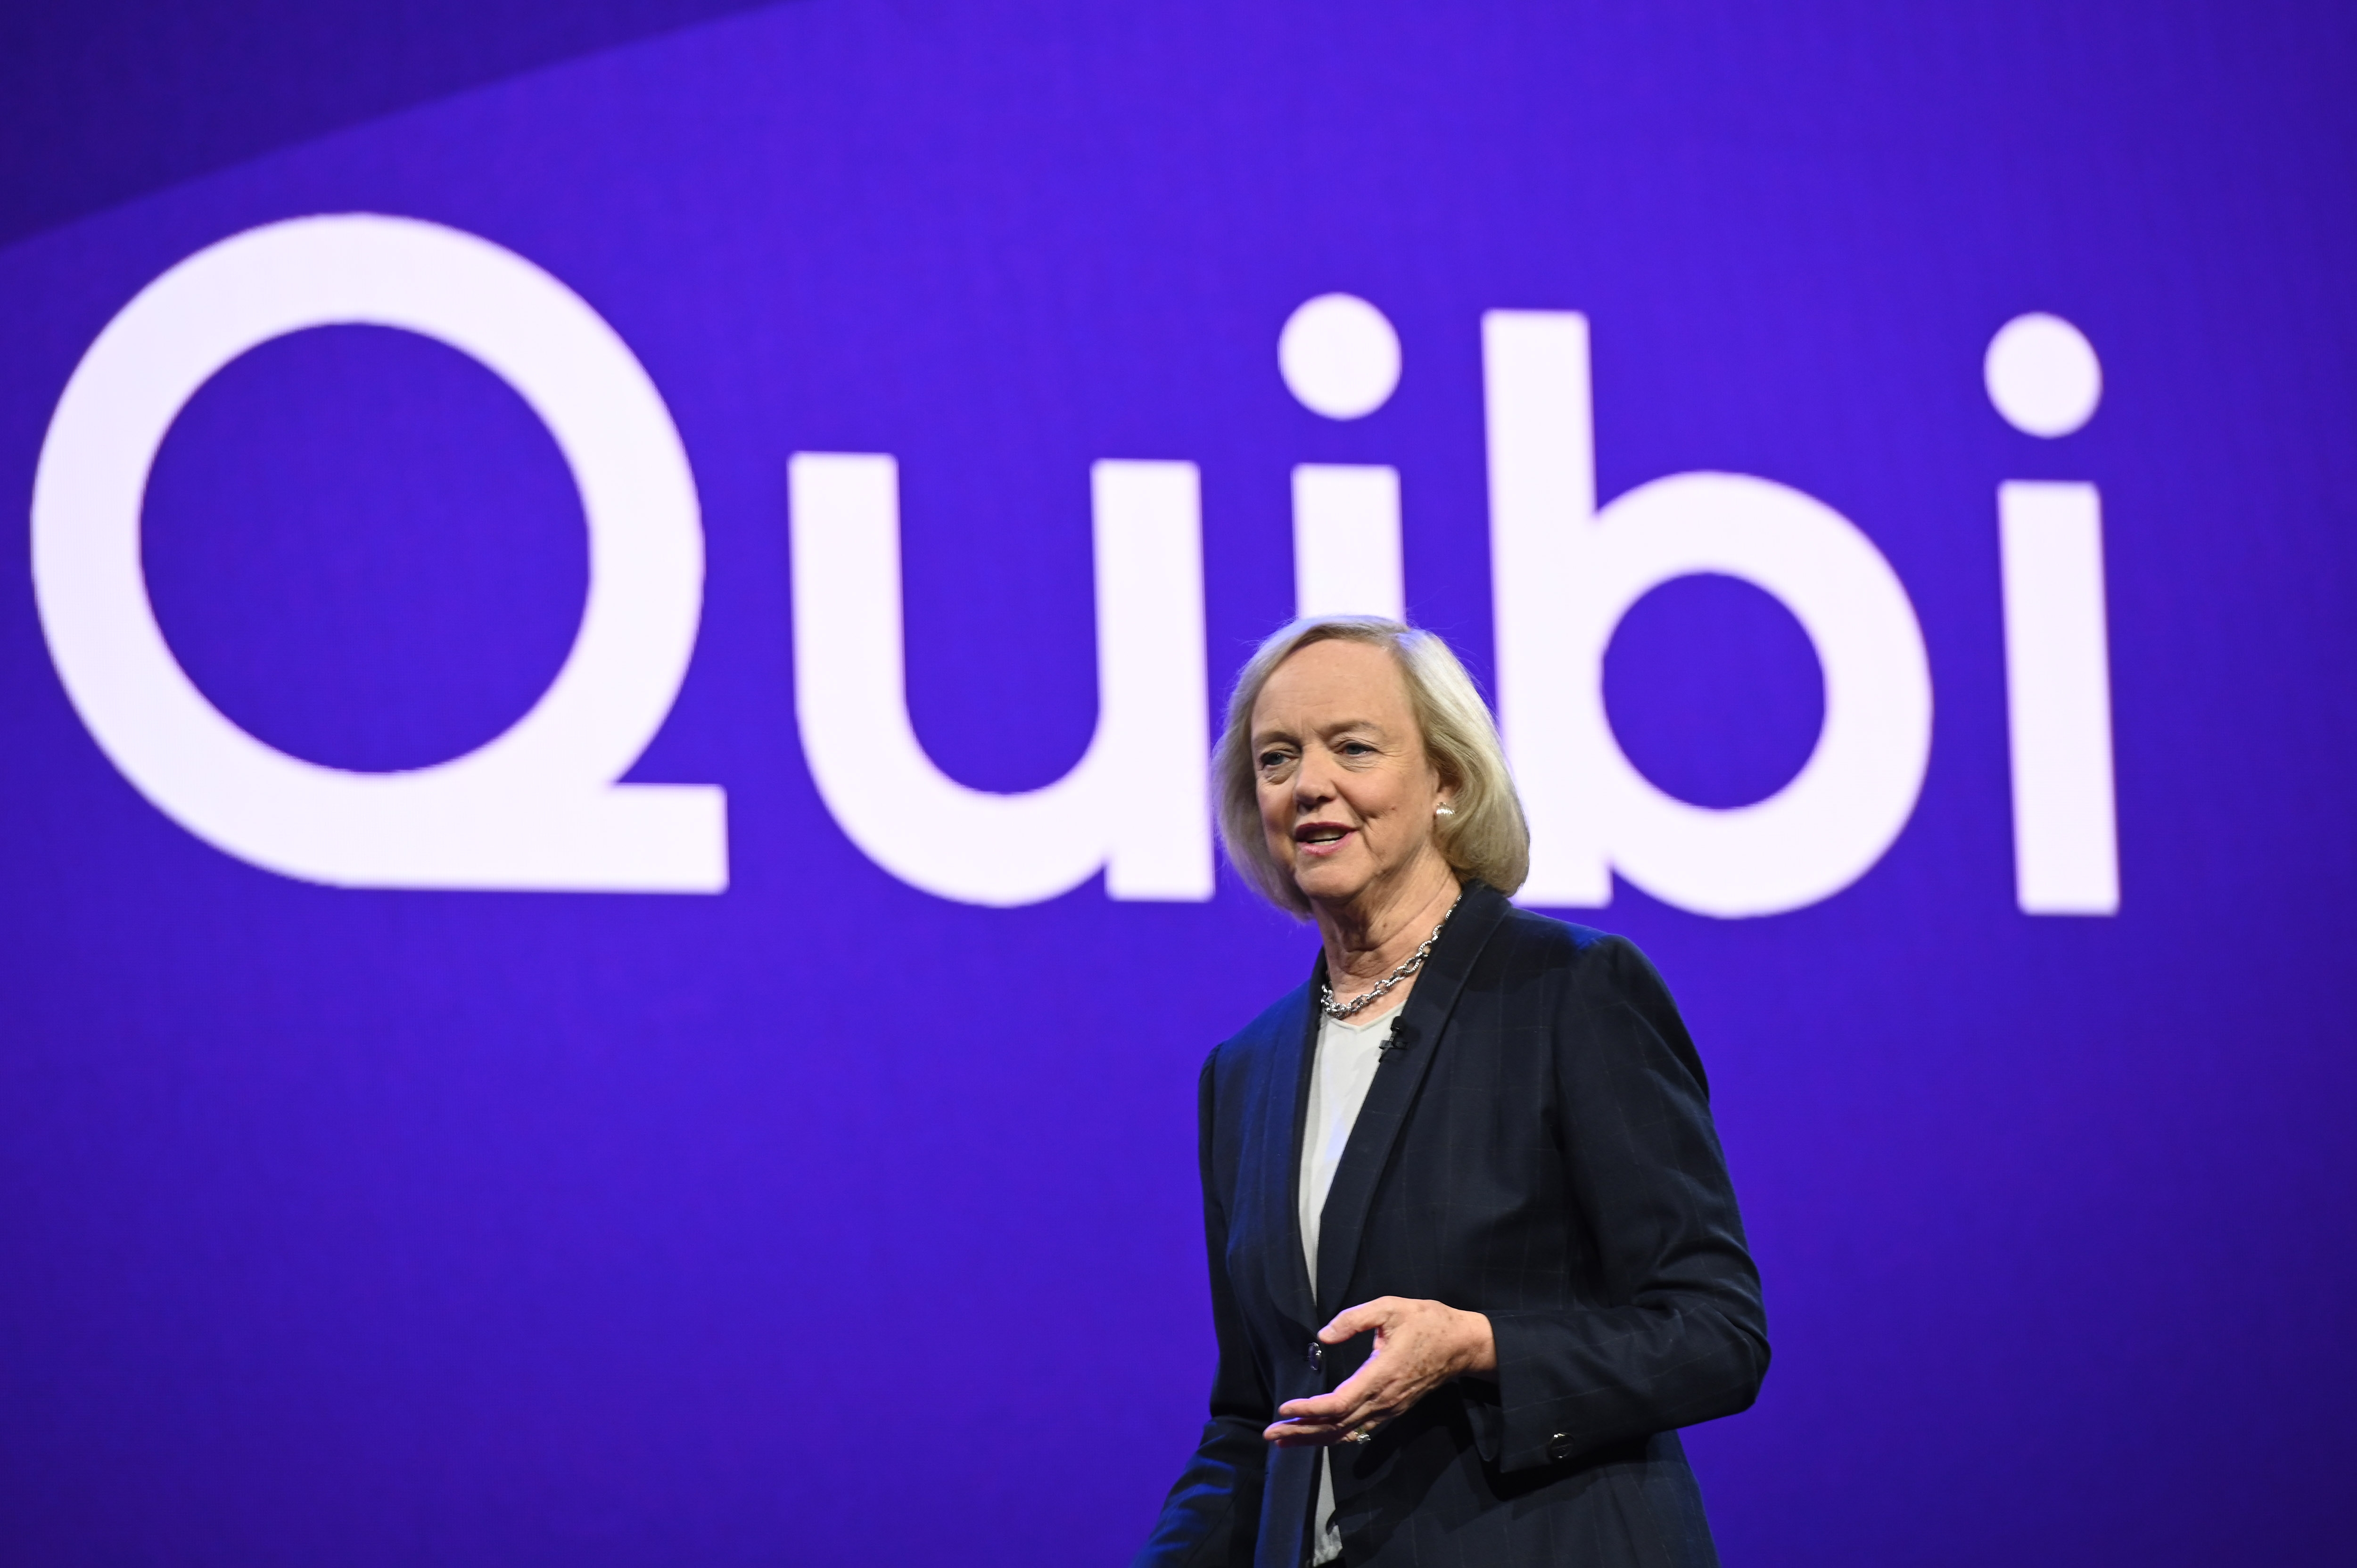 Quibi CEO Meg Whitman speaks about the short-form video streaming service for mobile Quibi